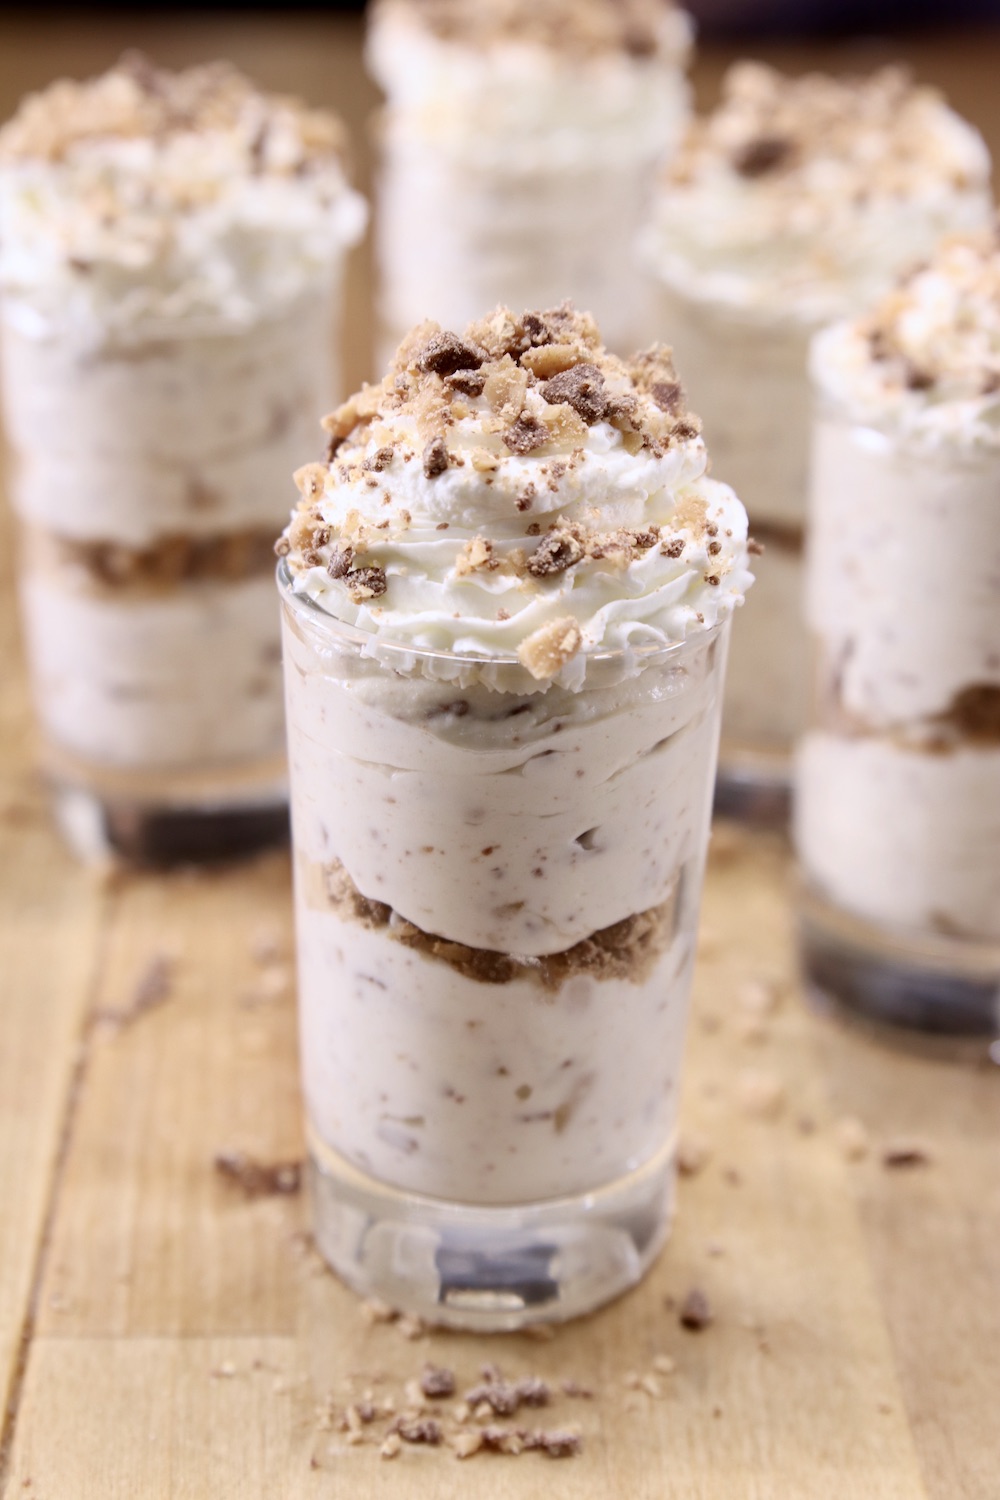 Toffee No Bake Cheesecake in jars